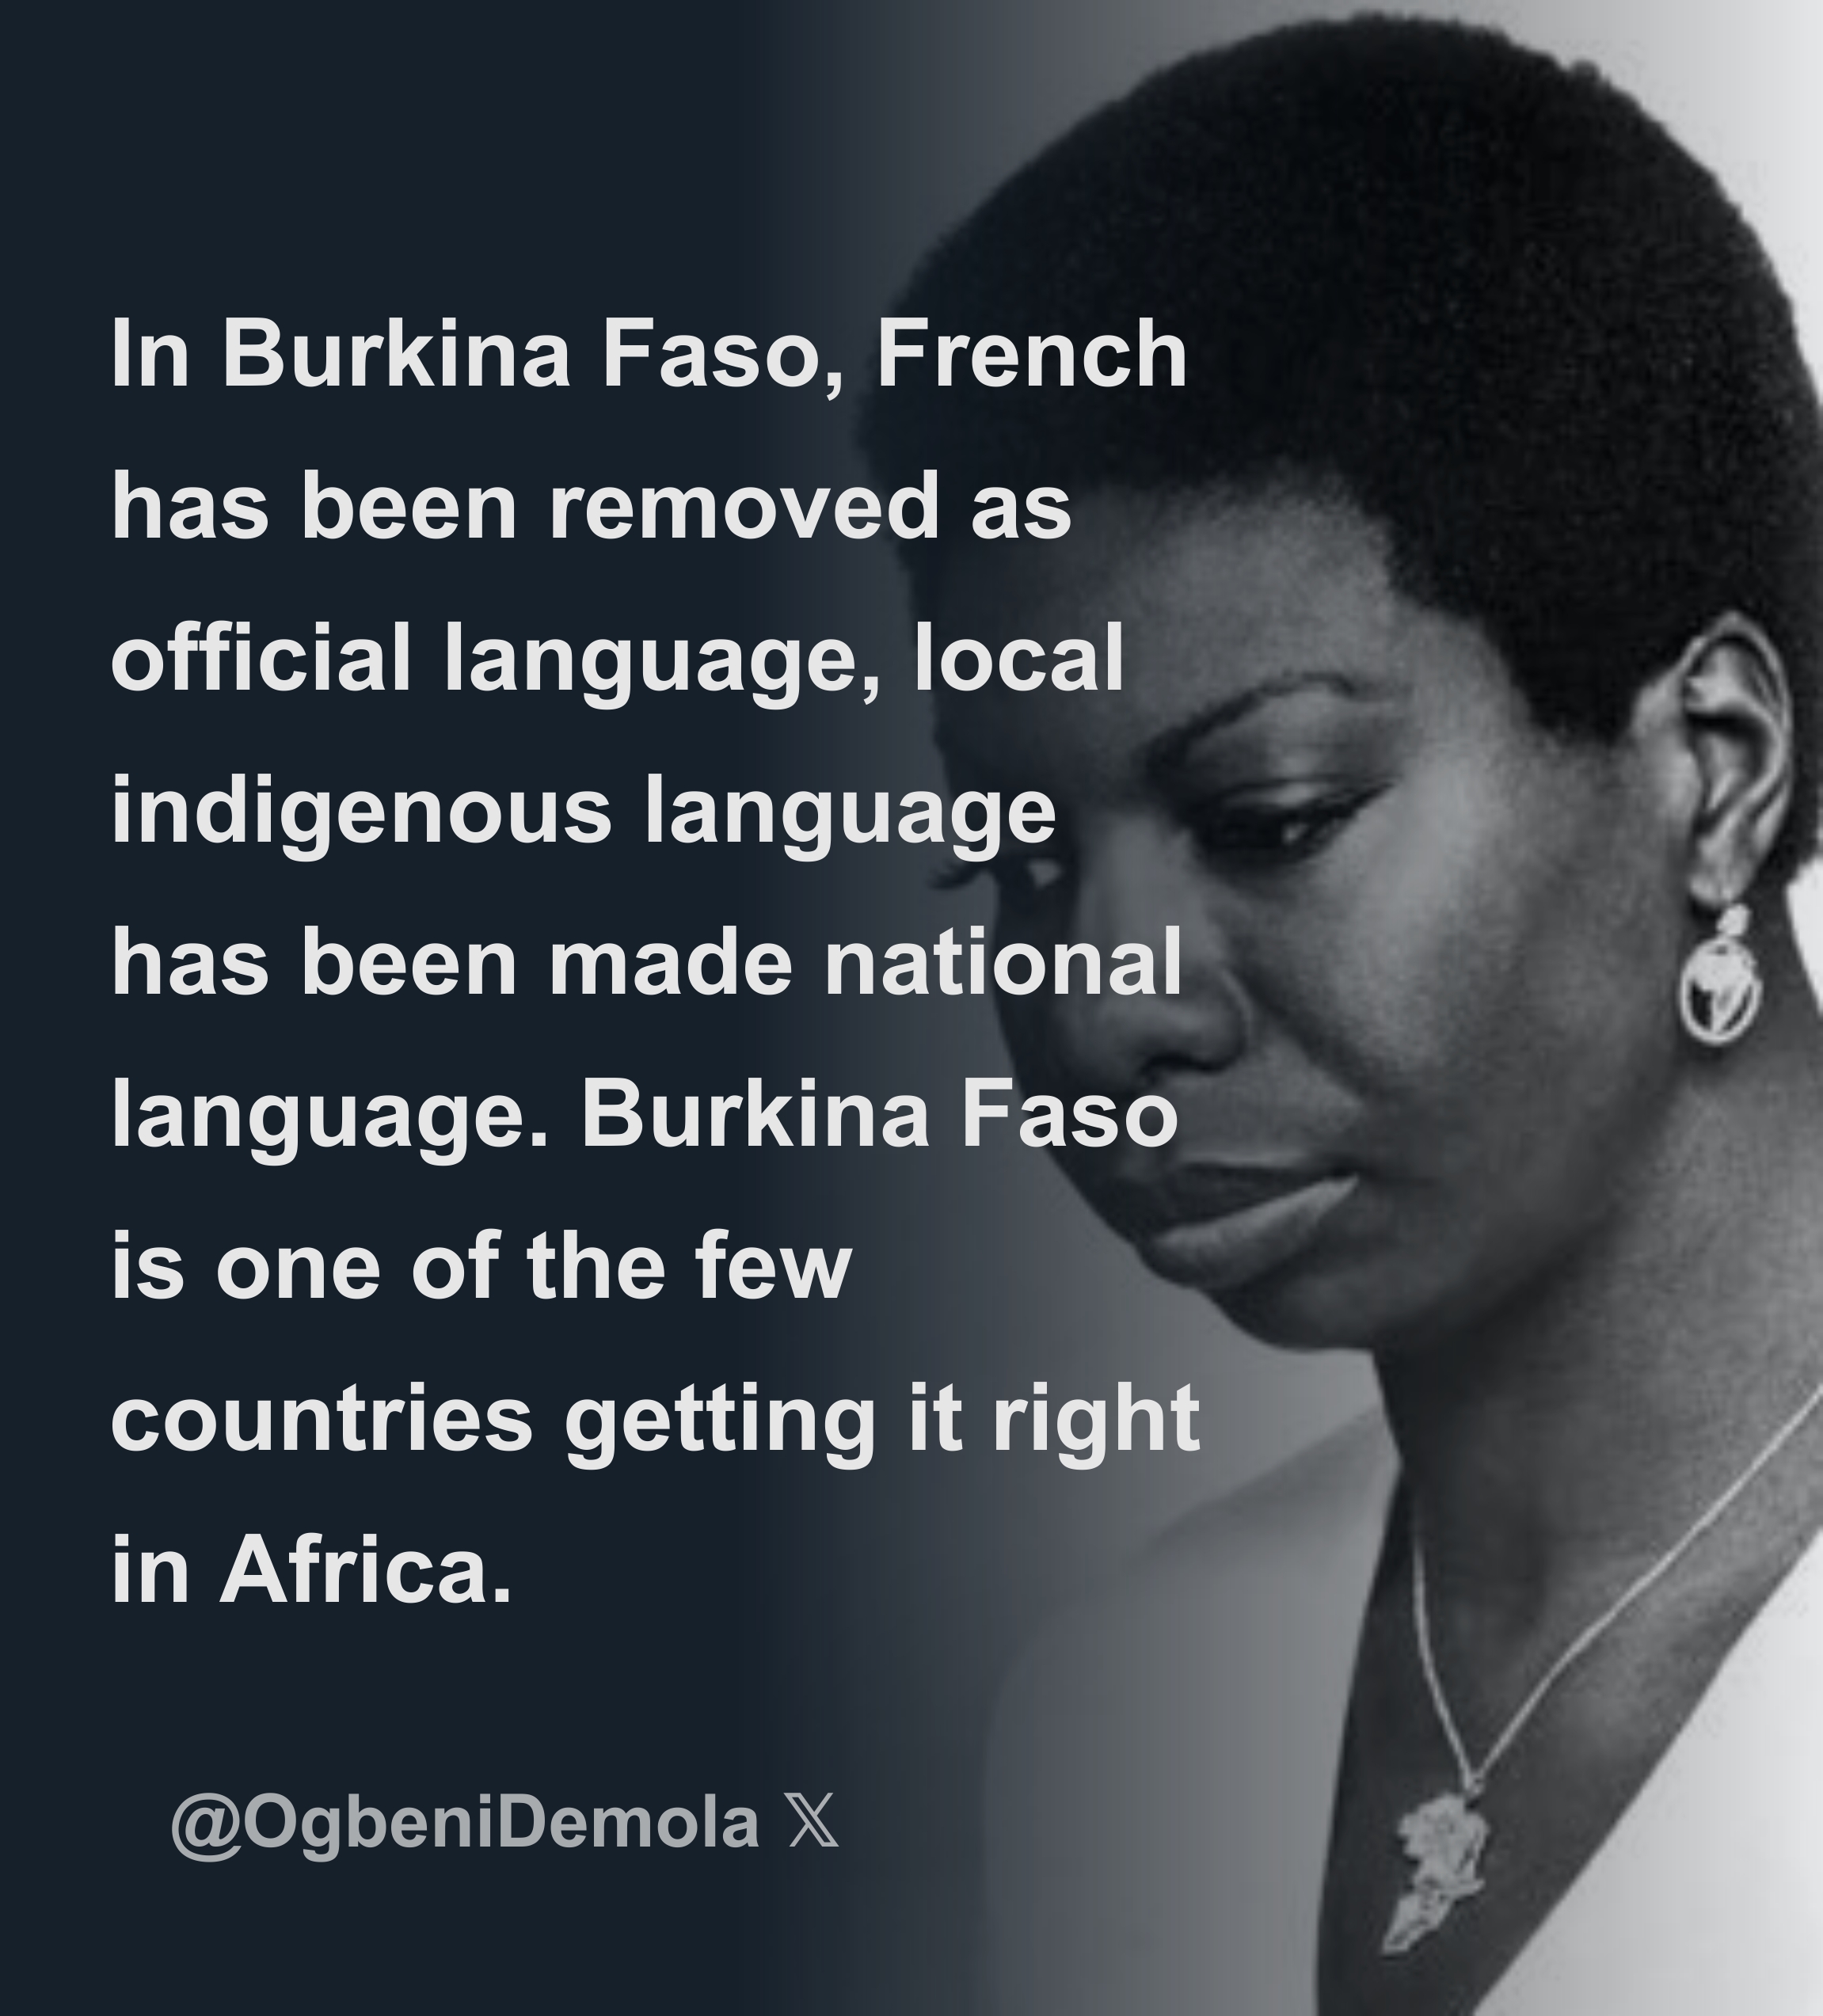 In Burkina Faso, French has been removed as official language